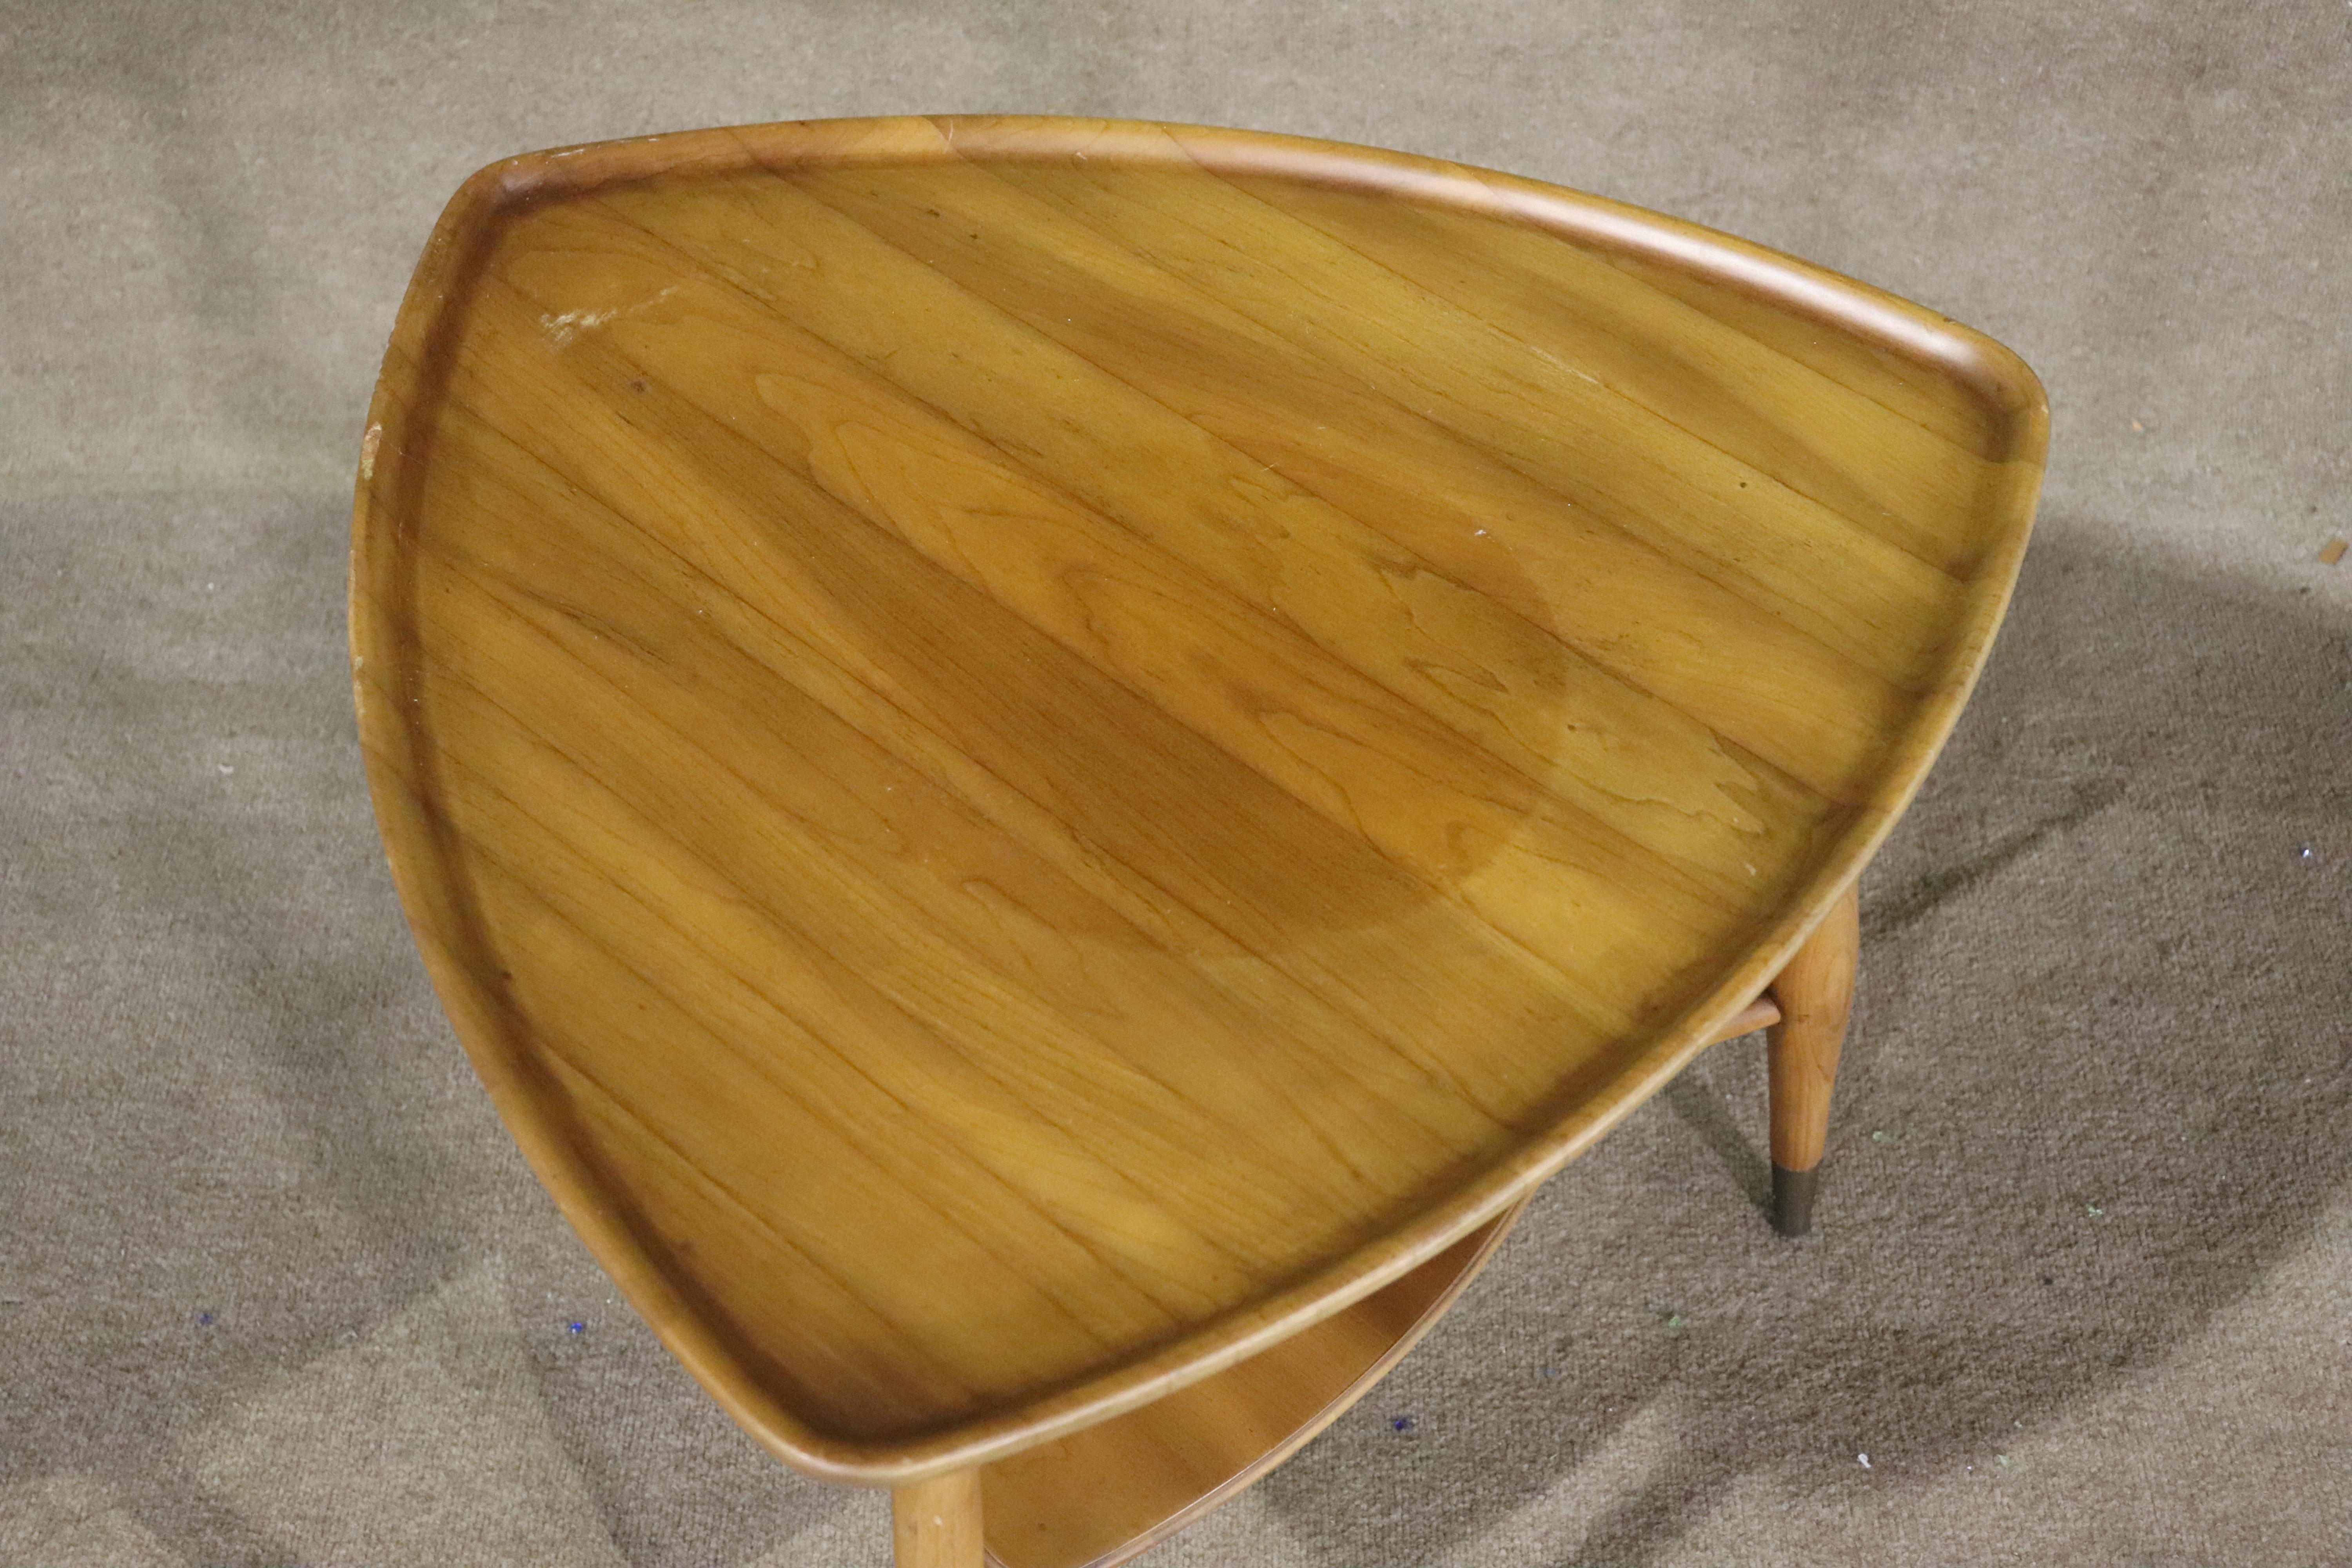 Guitar pick table made by John Widdicomb. Simple midcentury design with an elegant finish. Rounded edges and sculpted leg brace.
Please confirm location NY or NJ.